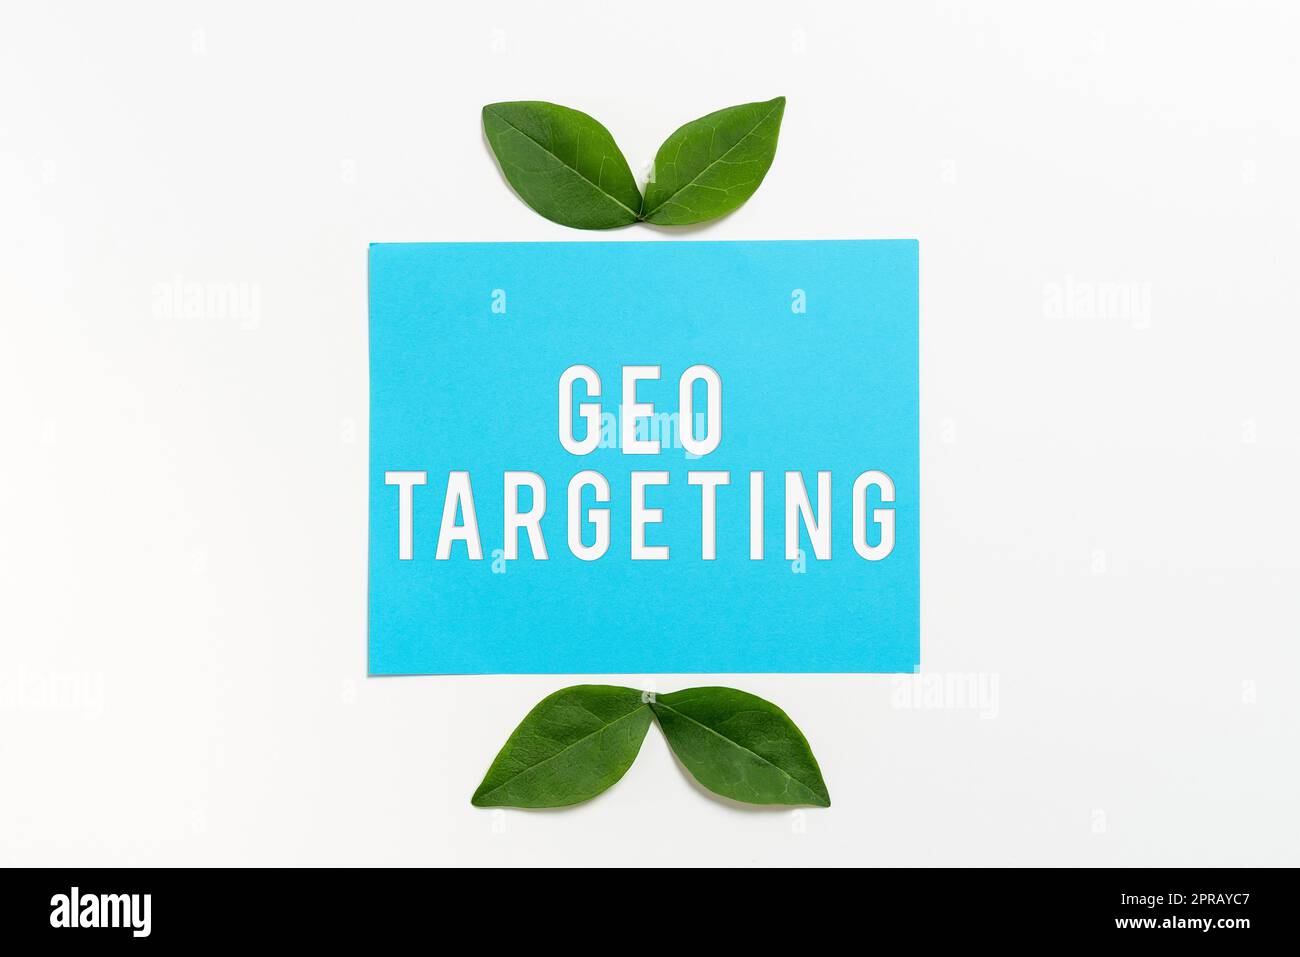 Inspiration showing sign Geo Targeting. Concept meaning Digital Ads Views IP Address Adwords Campaigns Location Blank Color Paper With Leaves Arranged For Business Promotion. Stock Photo